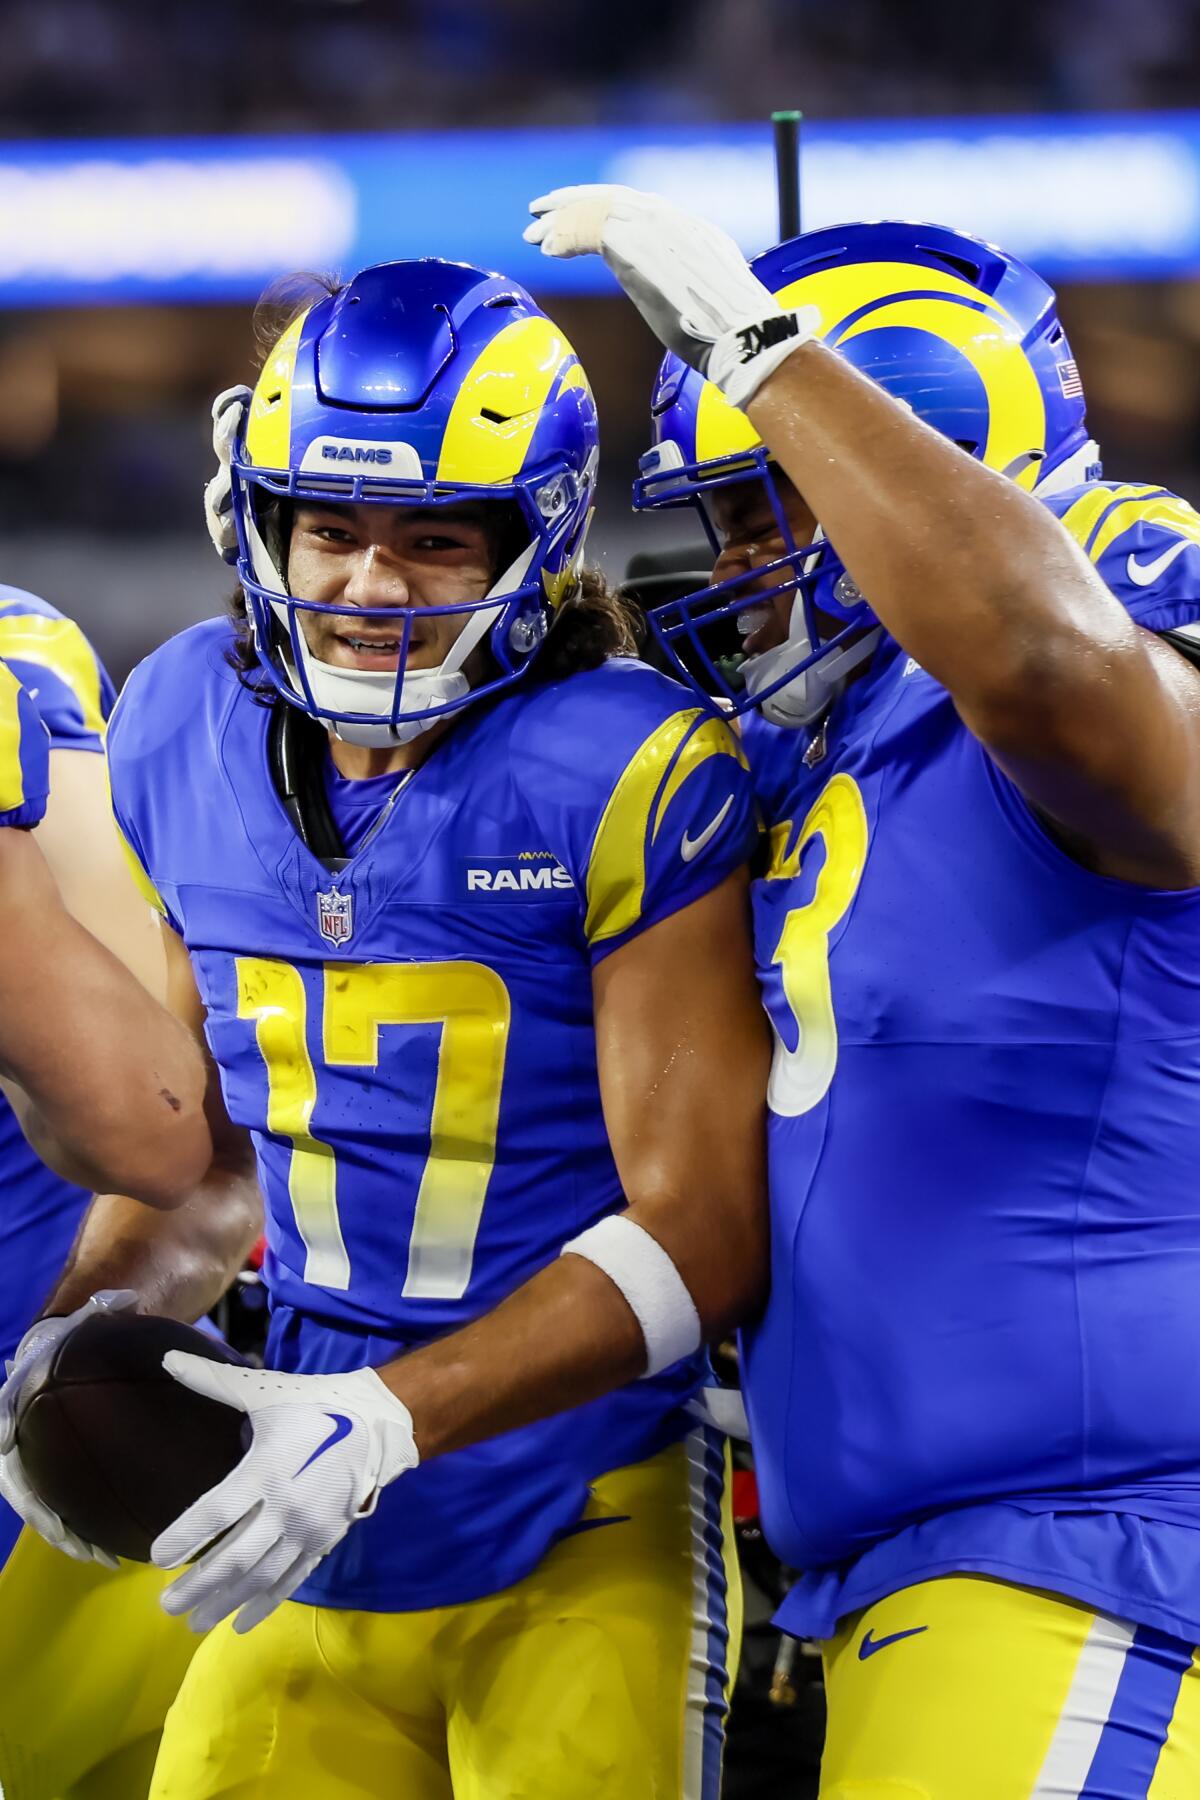  Los Angles Rams wide receiver Puka Nacua (17) celebrates a touchdown.